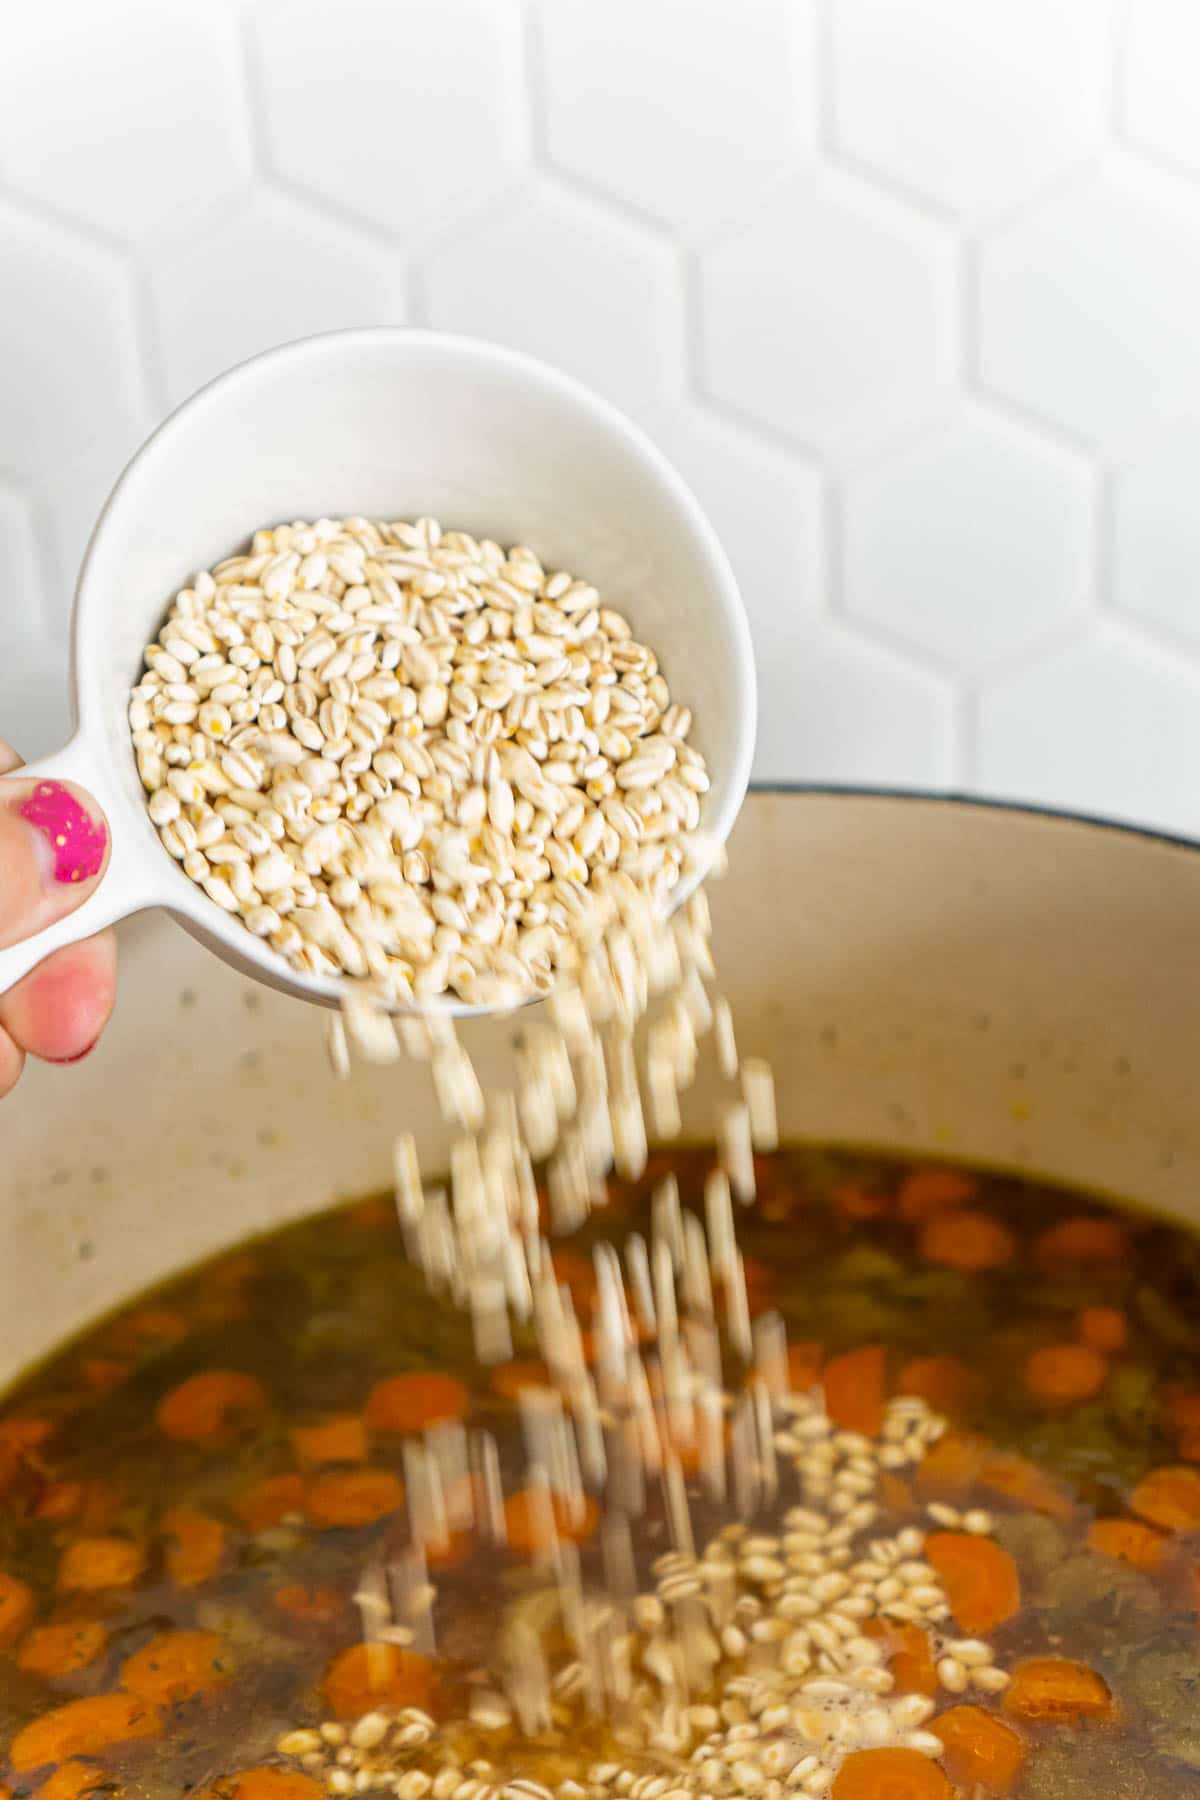 Woman's hand pouring in a cup of barley into a beef barley soup